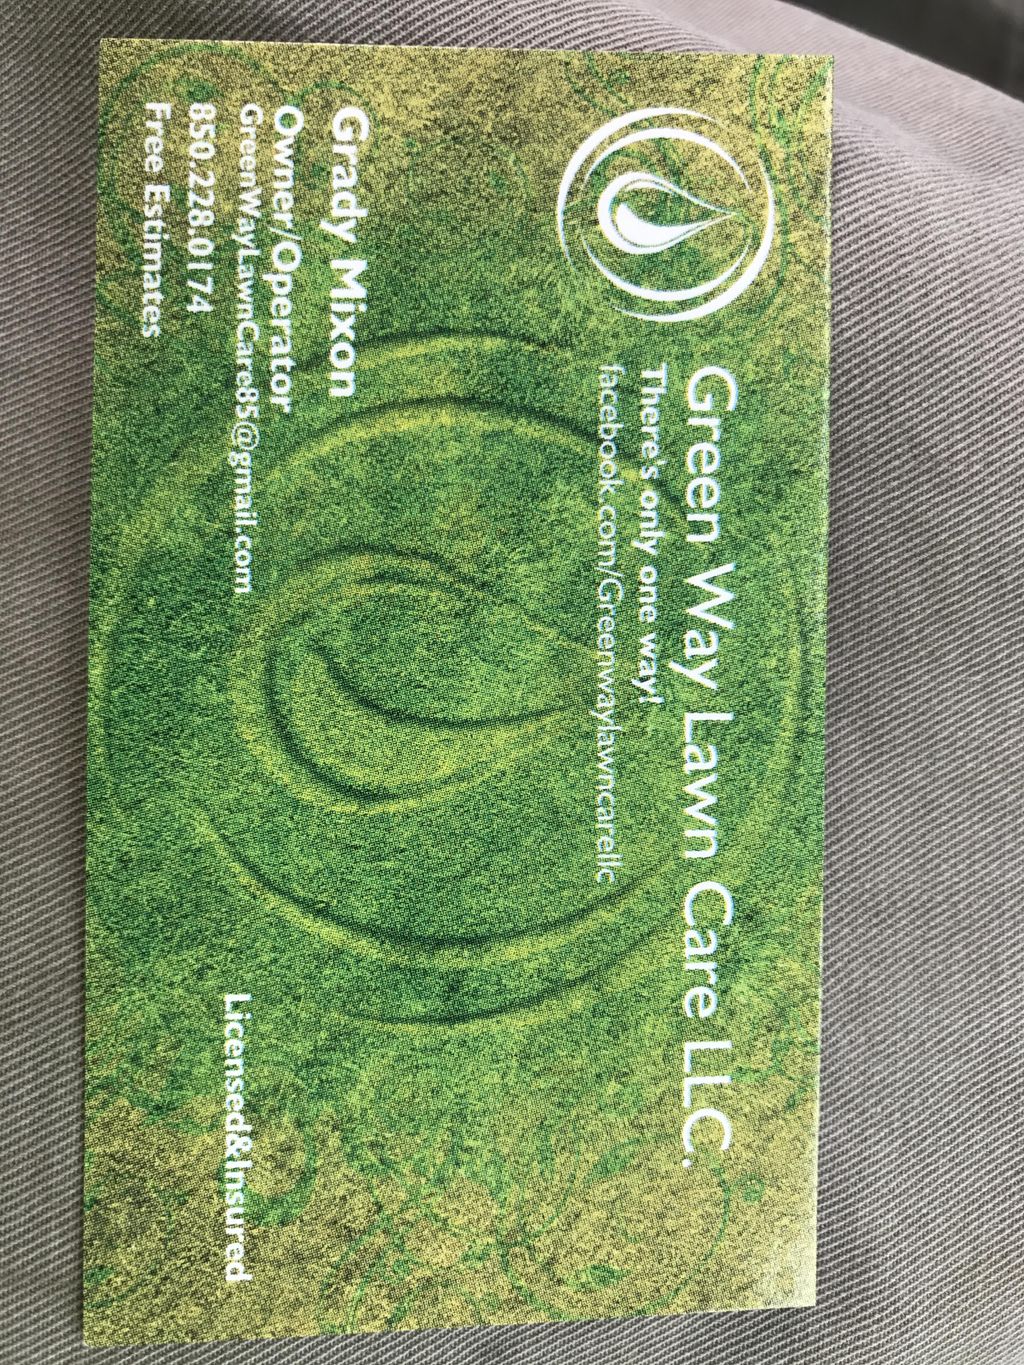 Green Way Lawn Care and Landscaping